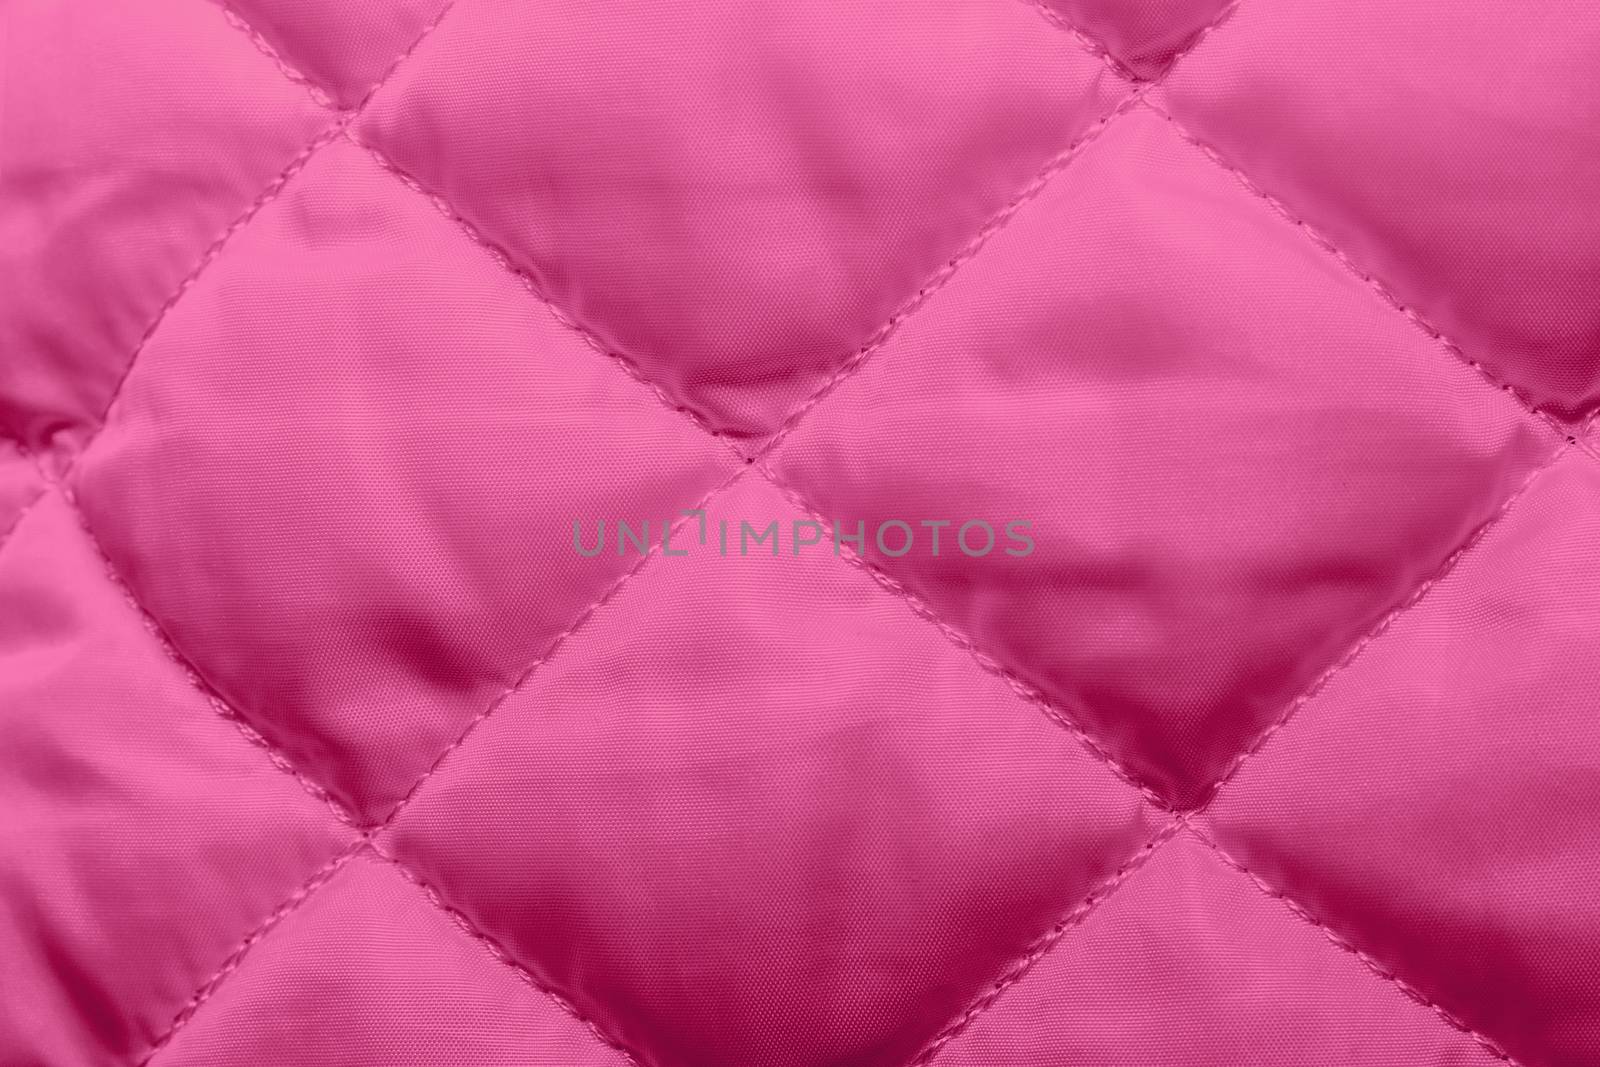 quilted fabric texture of pink color for hammering, backgrounds and textures